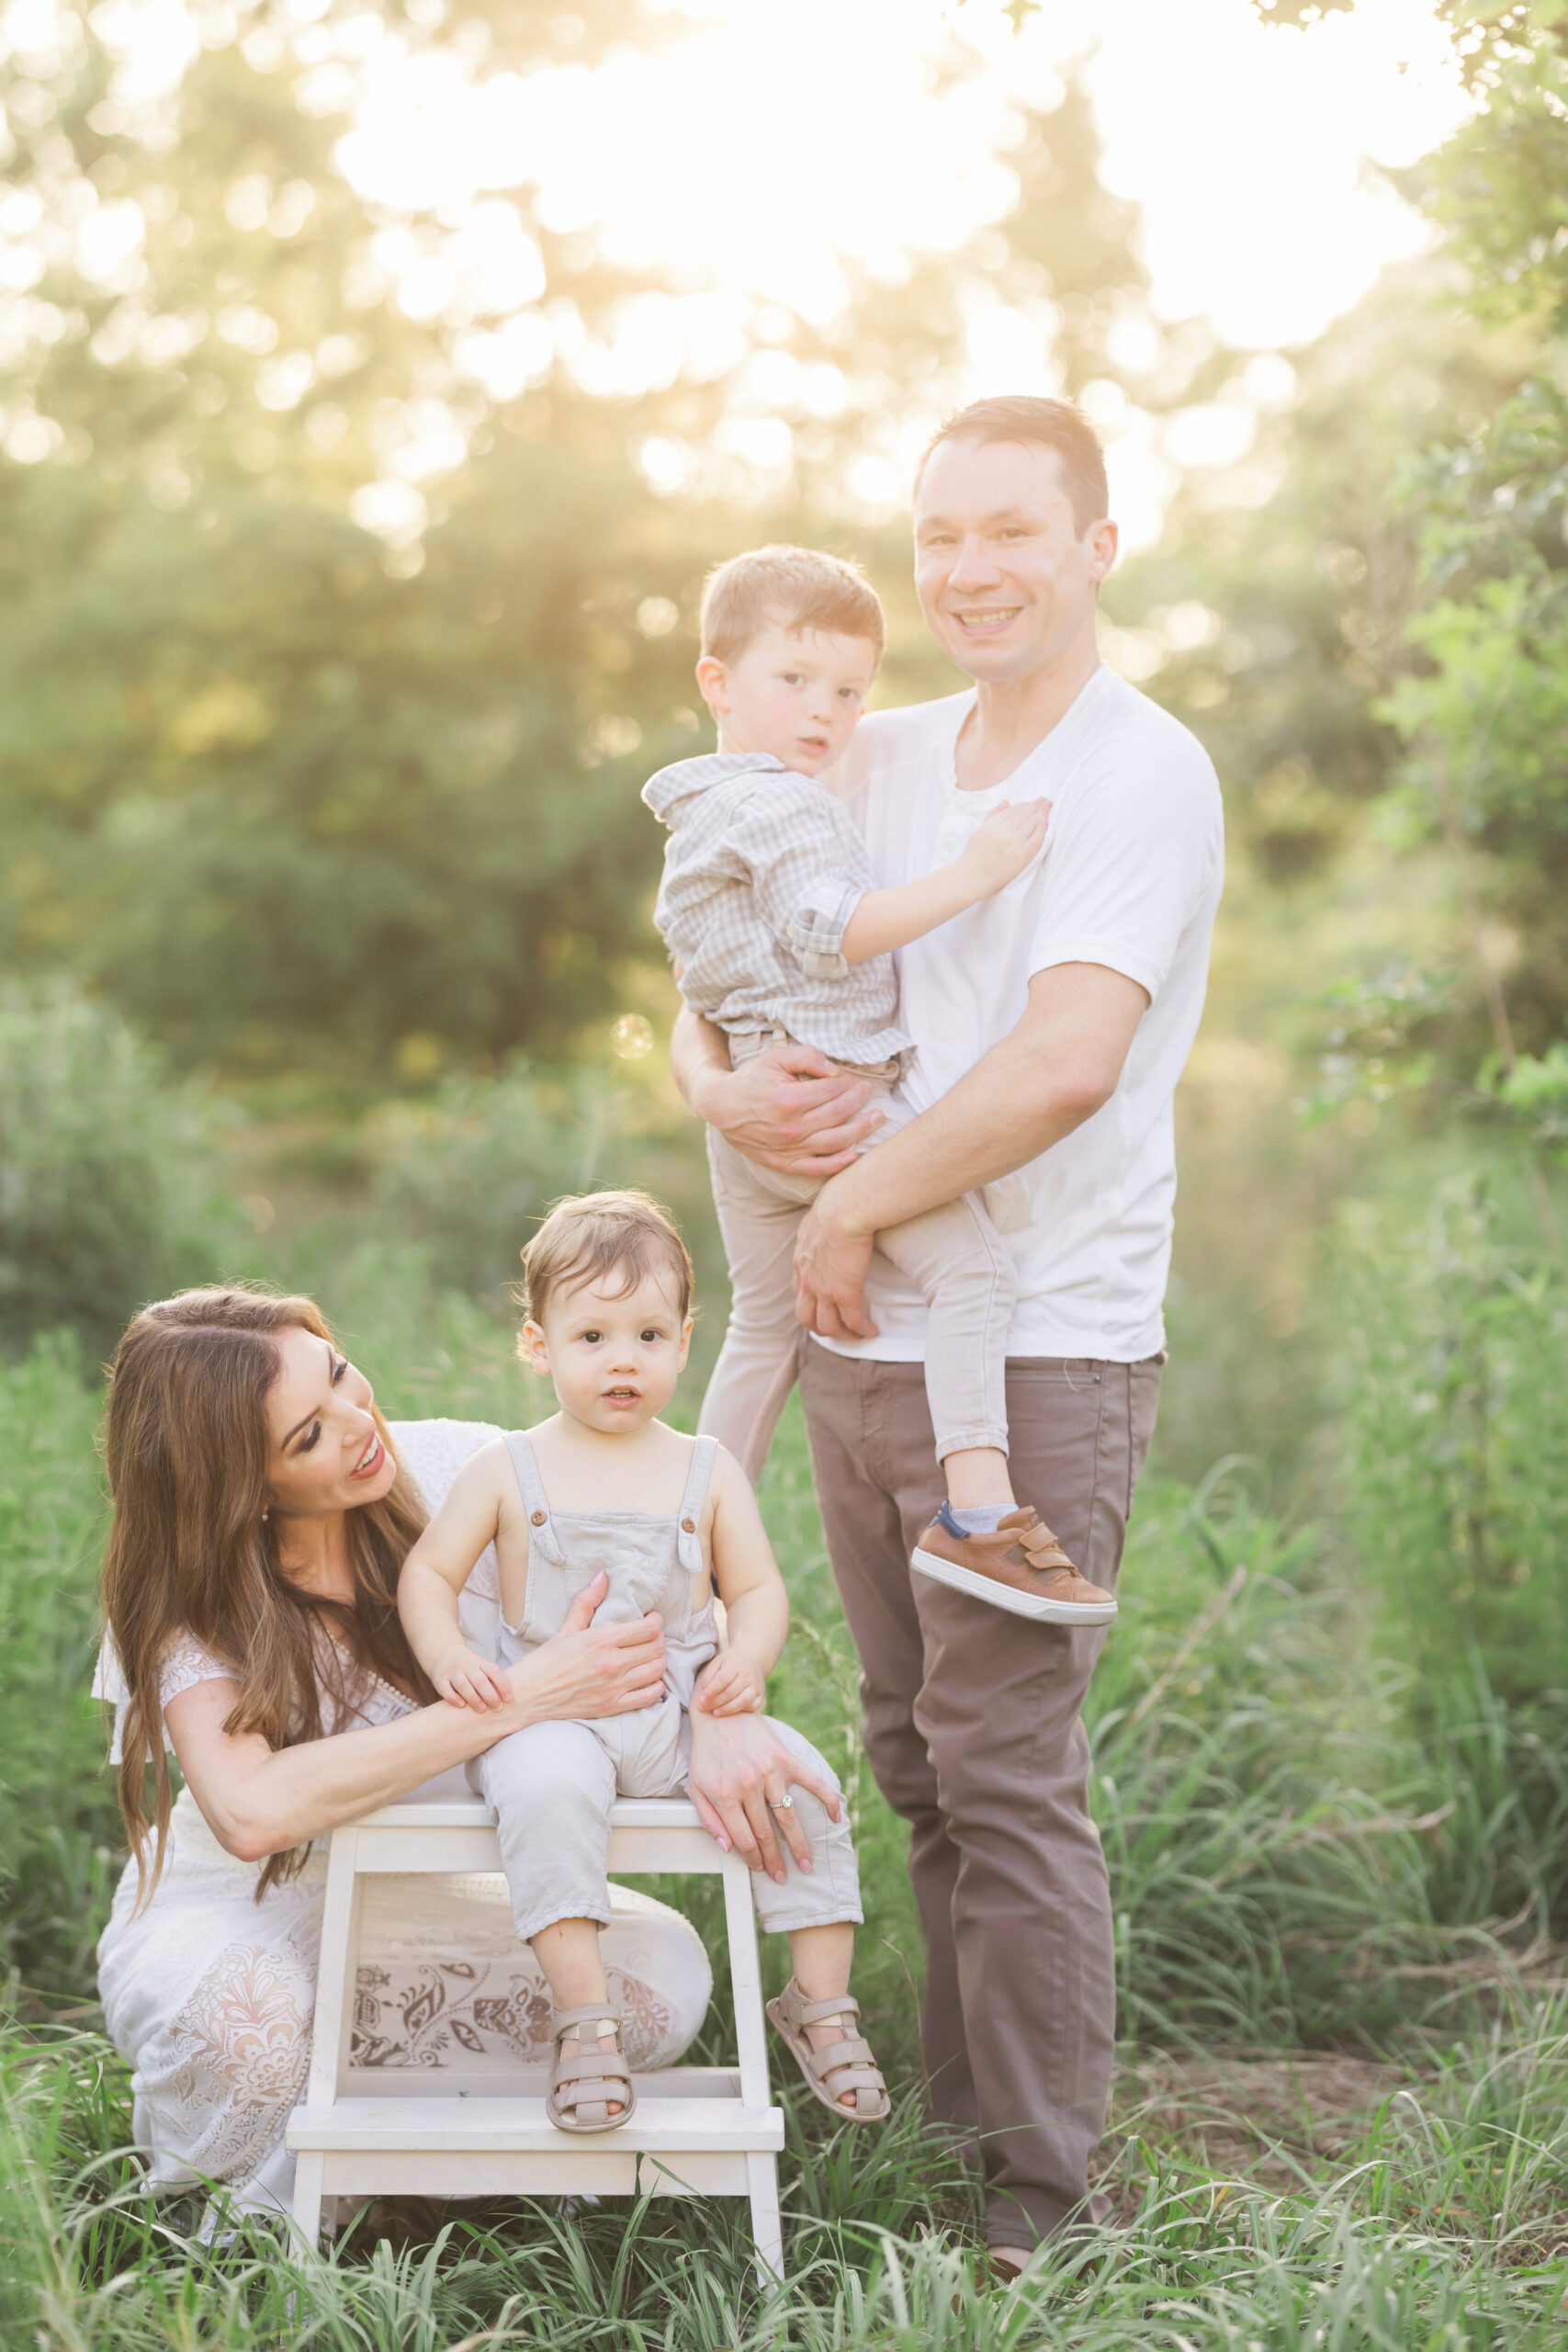 Candid moment of the family, expertly captured by Fresh Light Photography, as they share laughter and happiness amidst the stunning sunset backdrop.